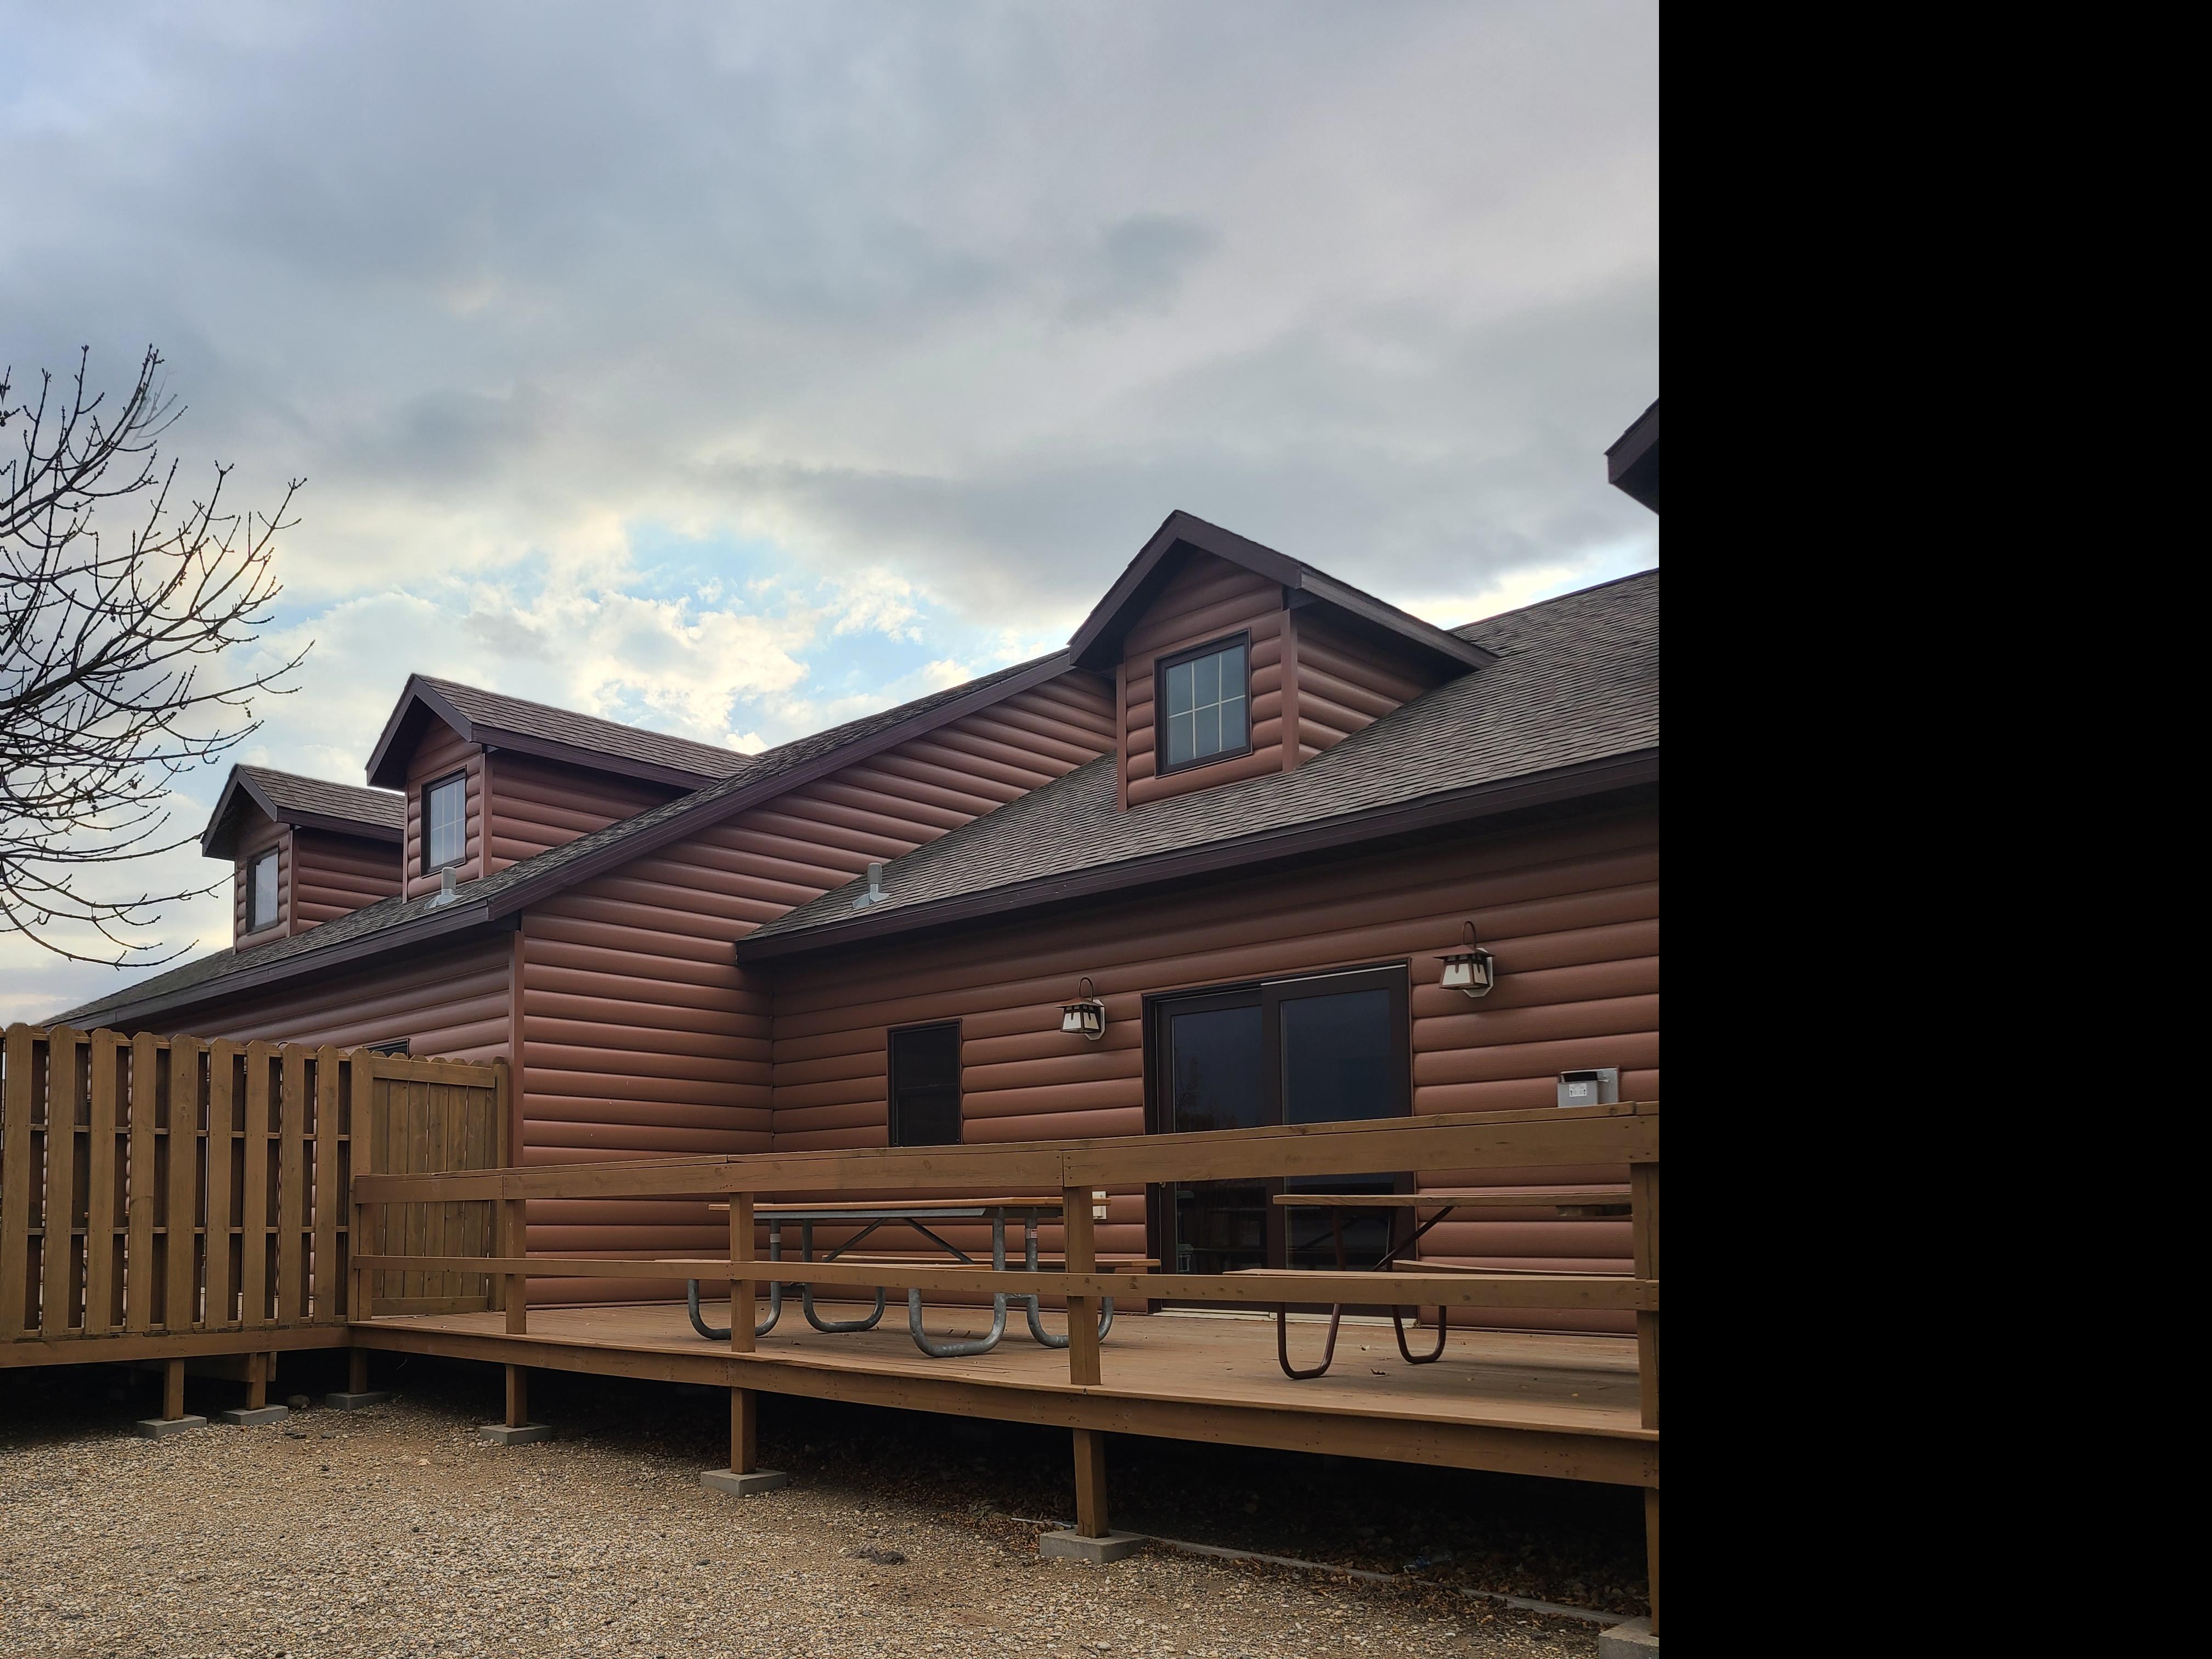 The popular lodging at Woodland Resort was built by Tad Schmidt Builders, a local general contractor of the Devils Lake, North Dakota area.